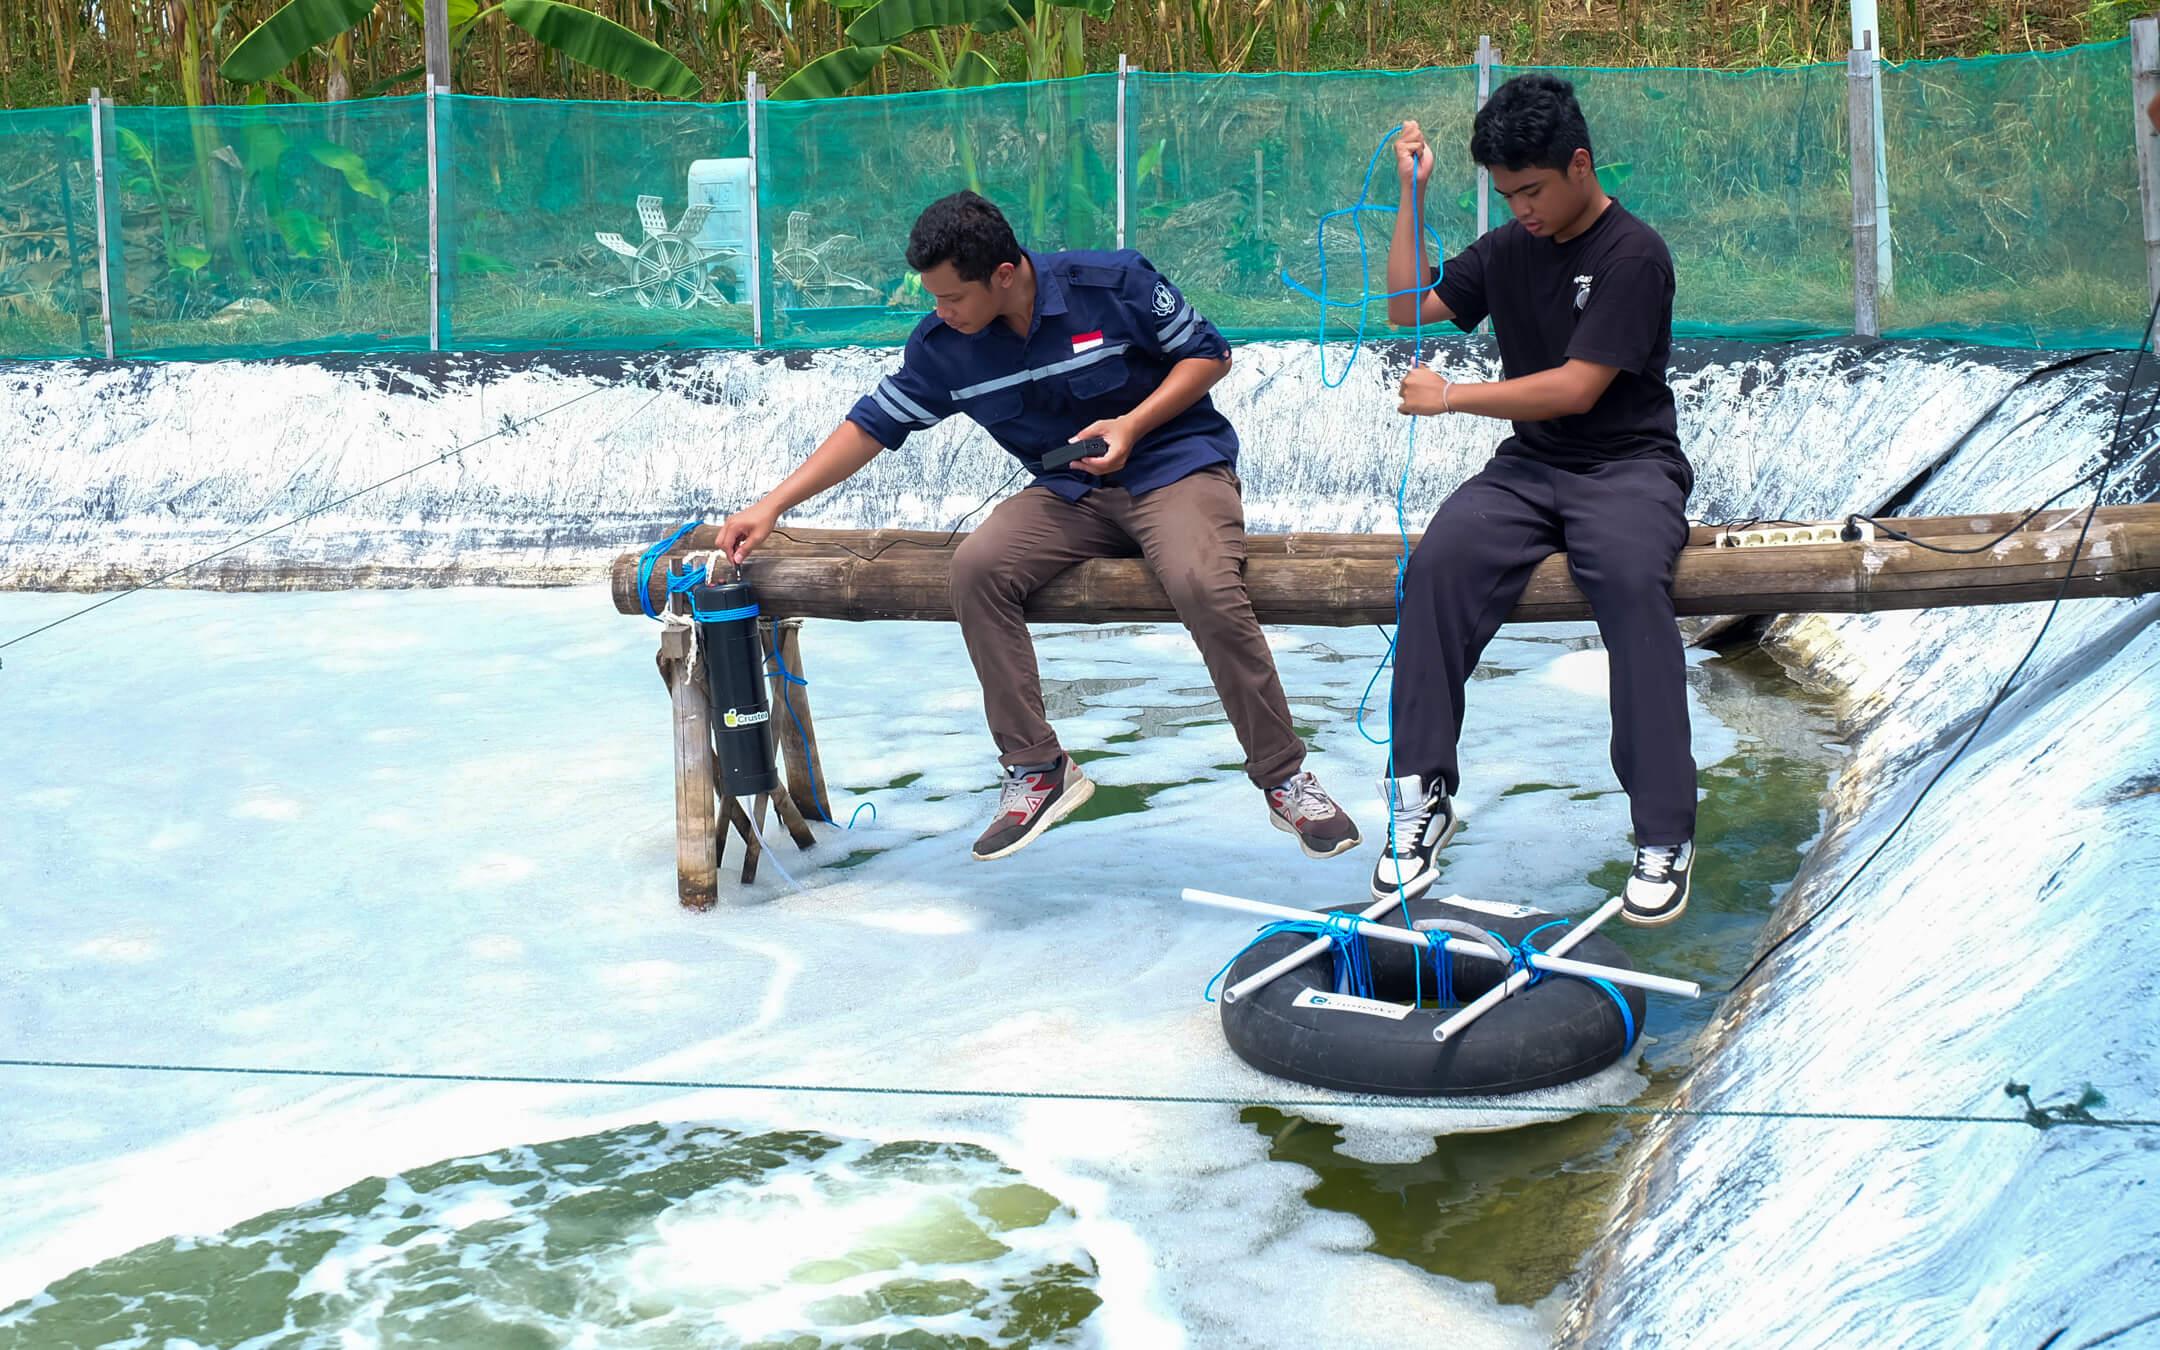 Indonesian shrimp farmers depend on electric aeration systems to oxygenate water and prevent pollution.
Photo: Crustea